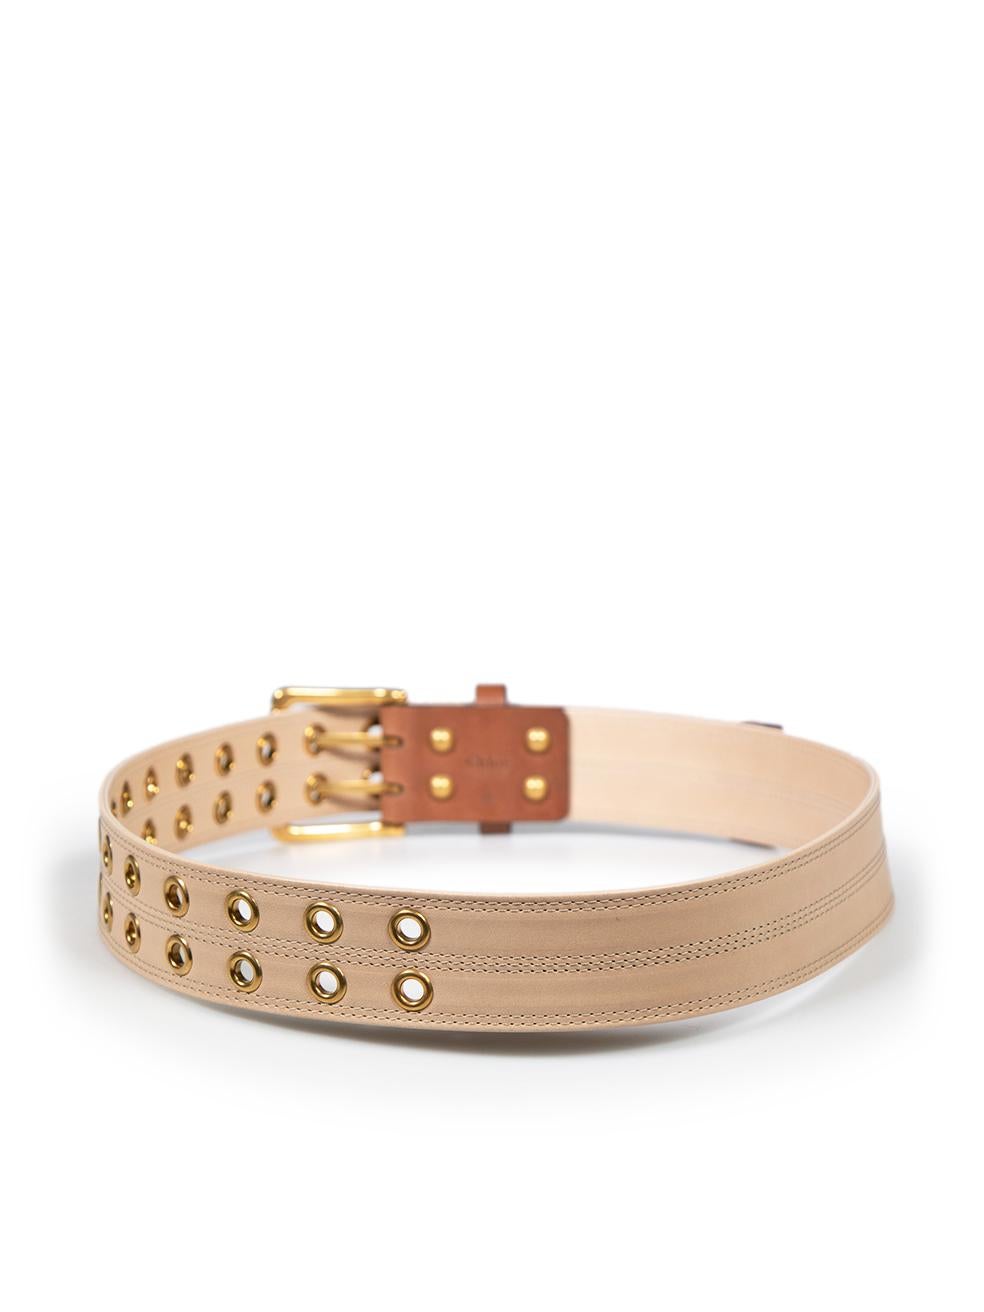 Chloé Beige Leather Eyelets Belt In Excellent Condition For Sale In London, GB